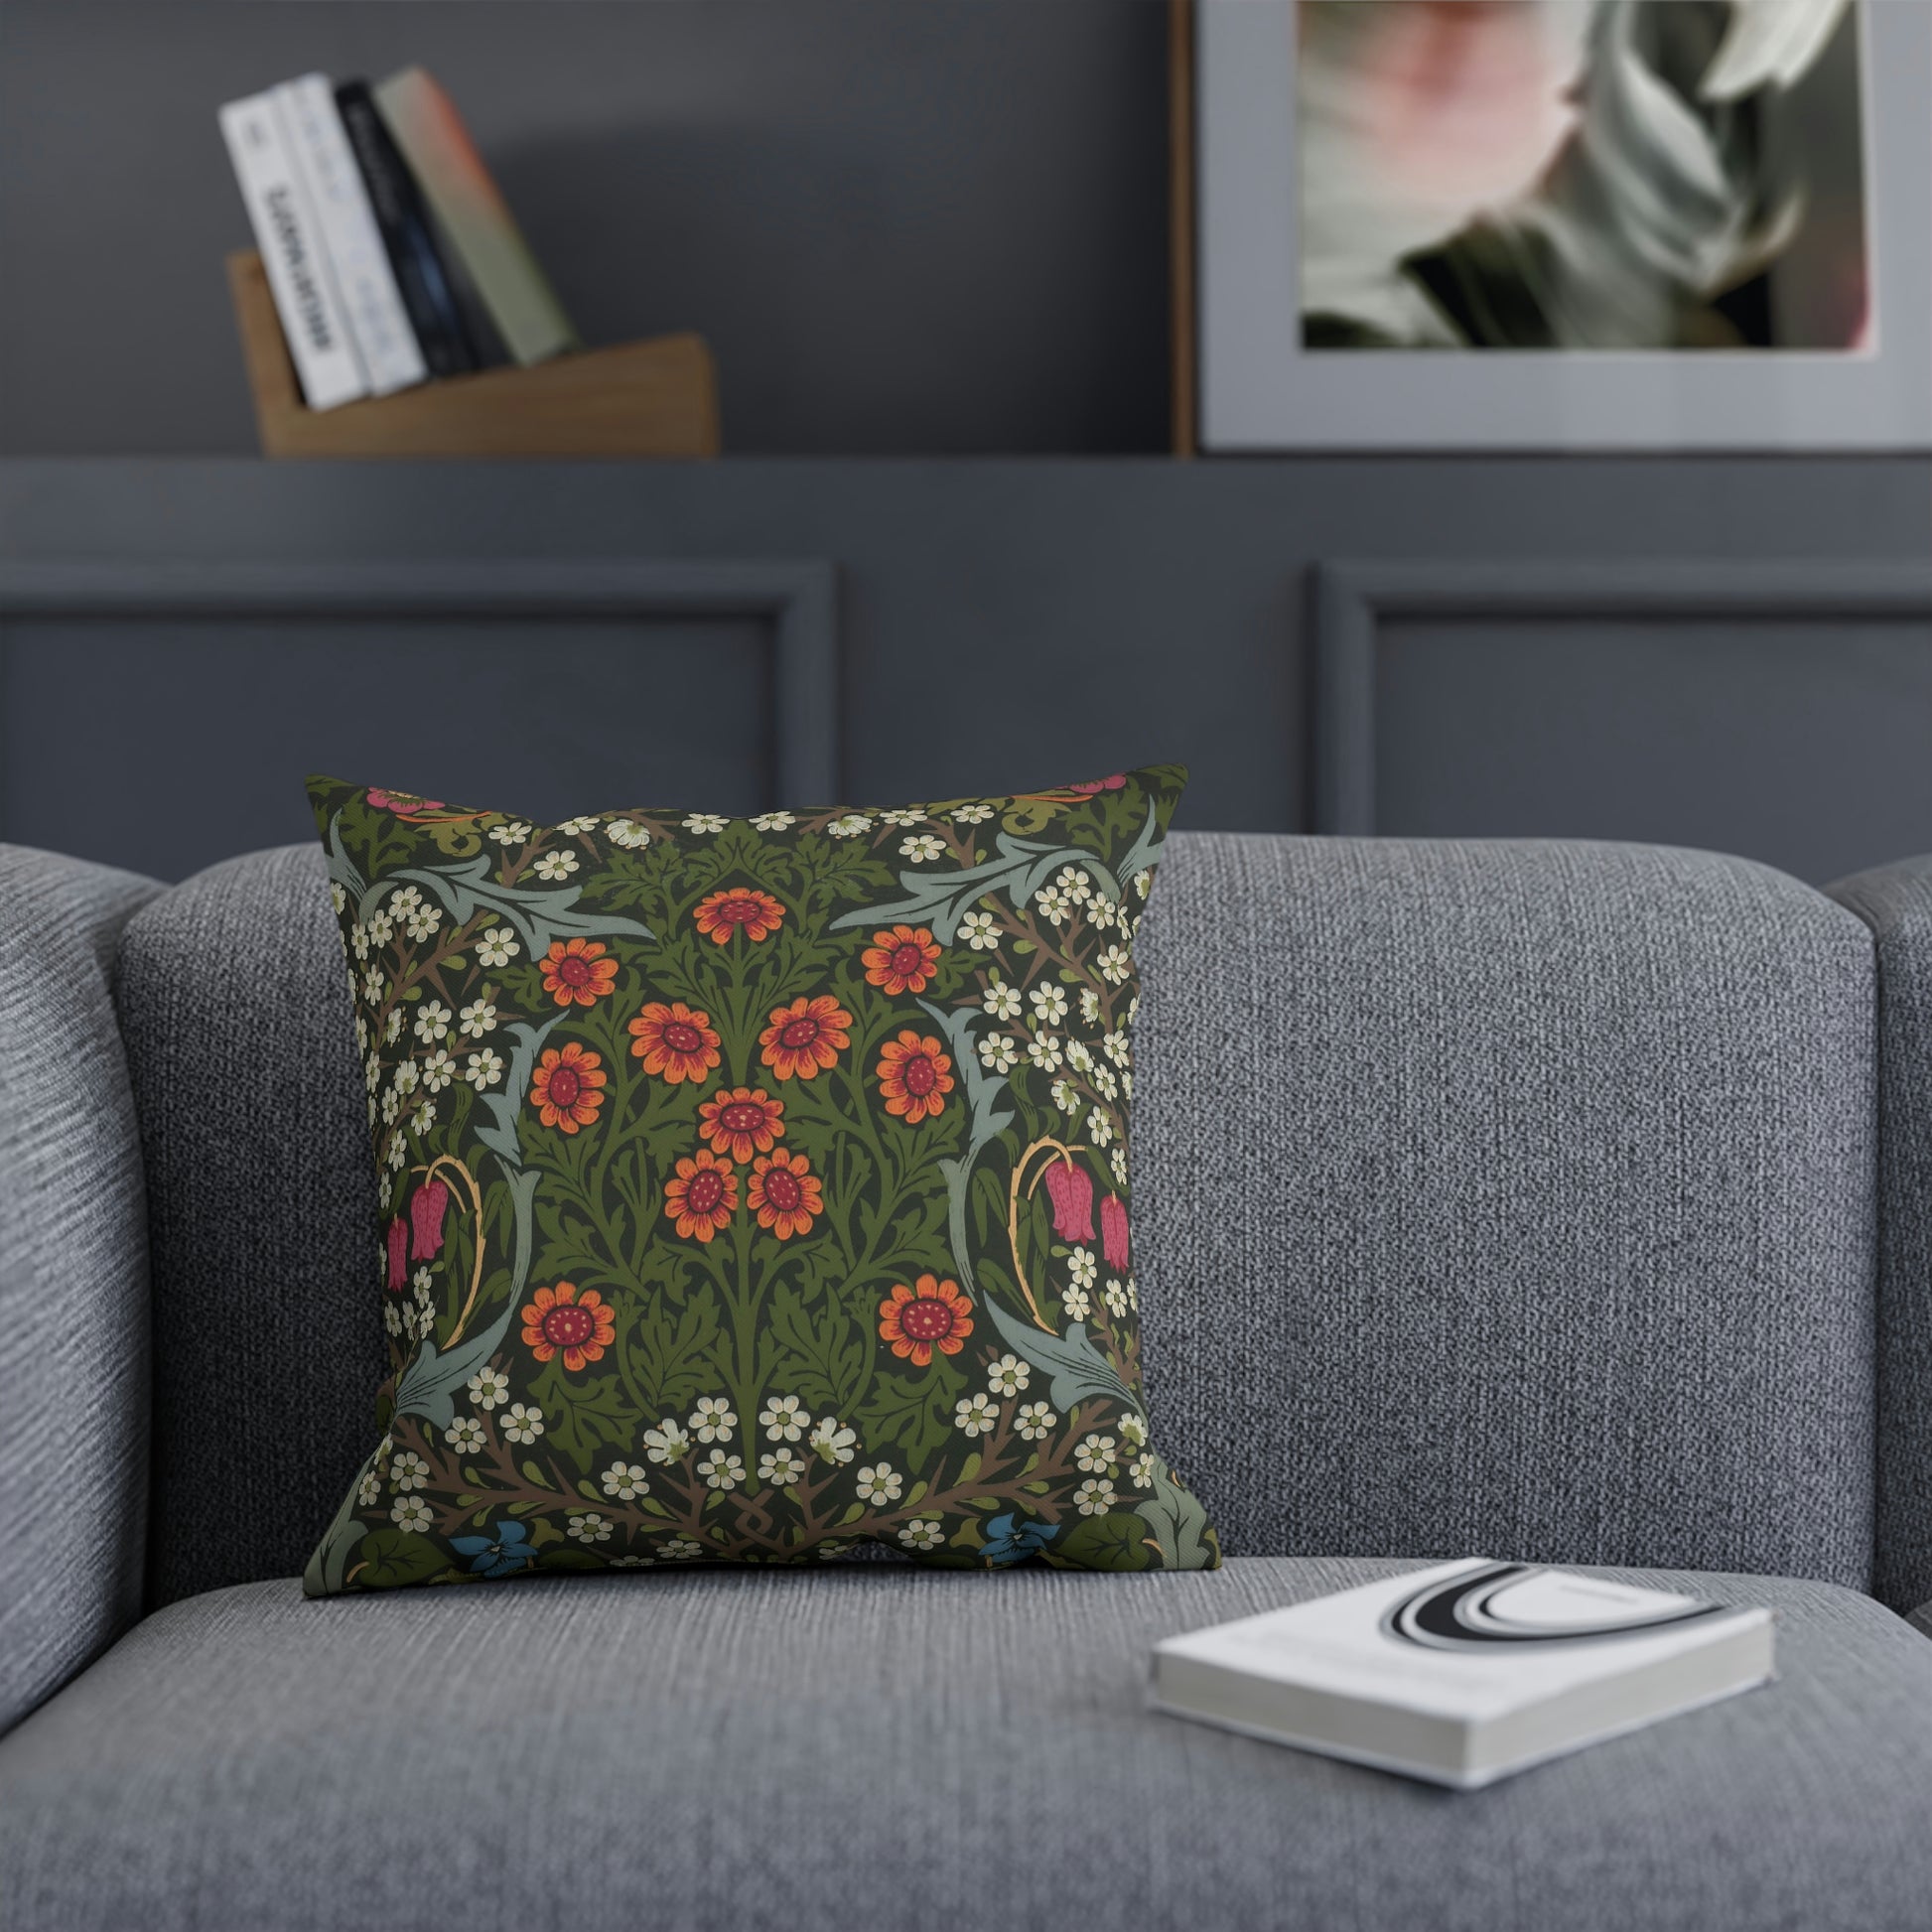 william-morris-cushion-and-cushion-cover-blackthorn-collection-4